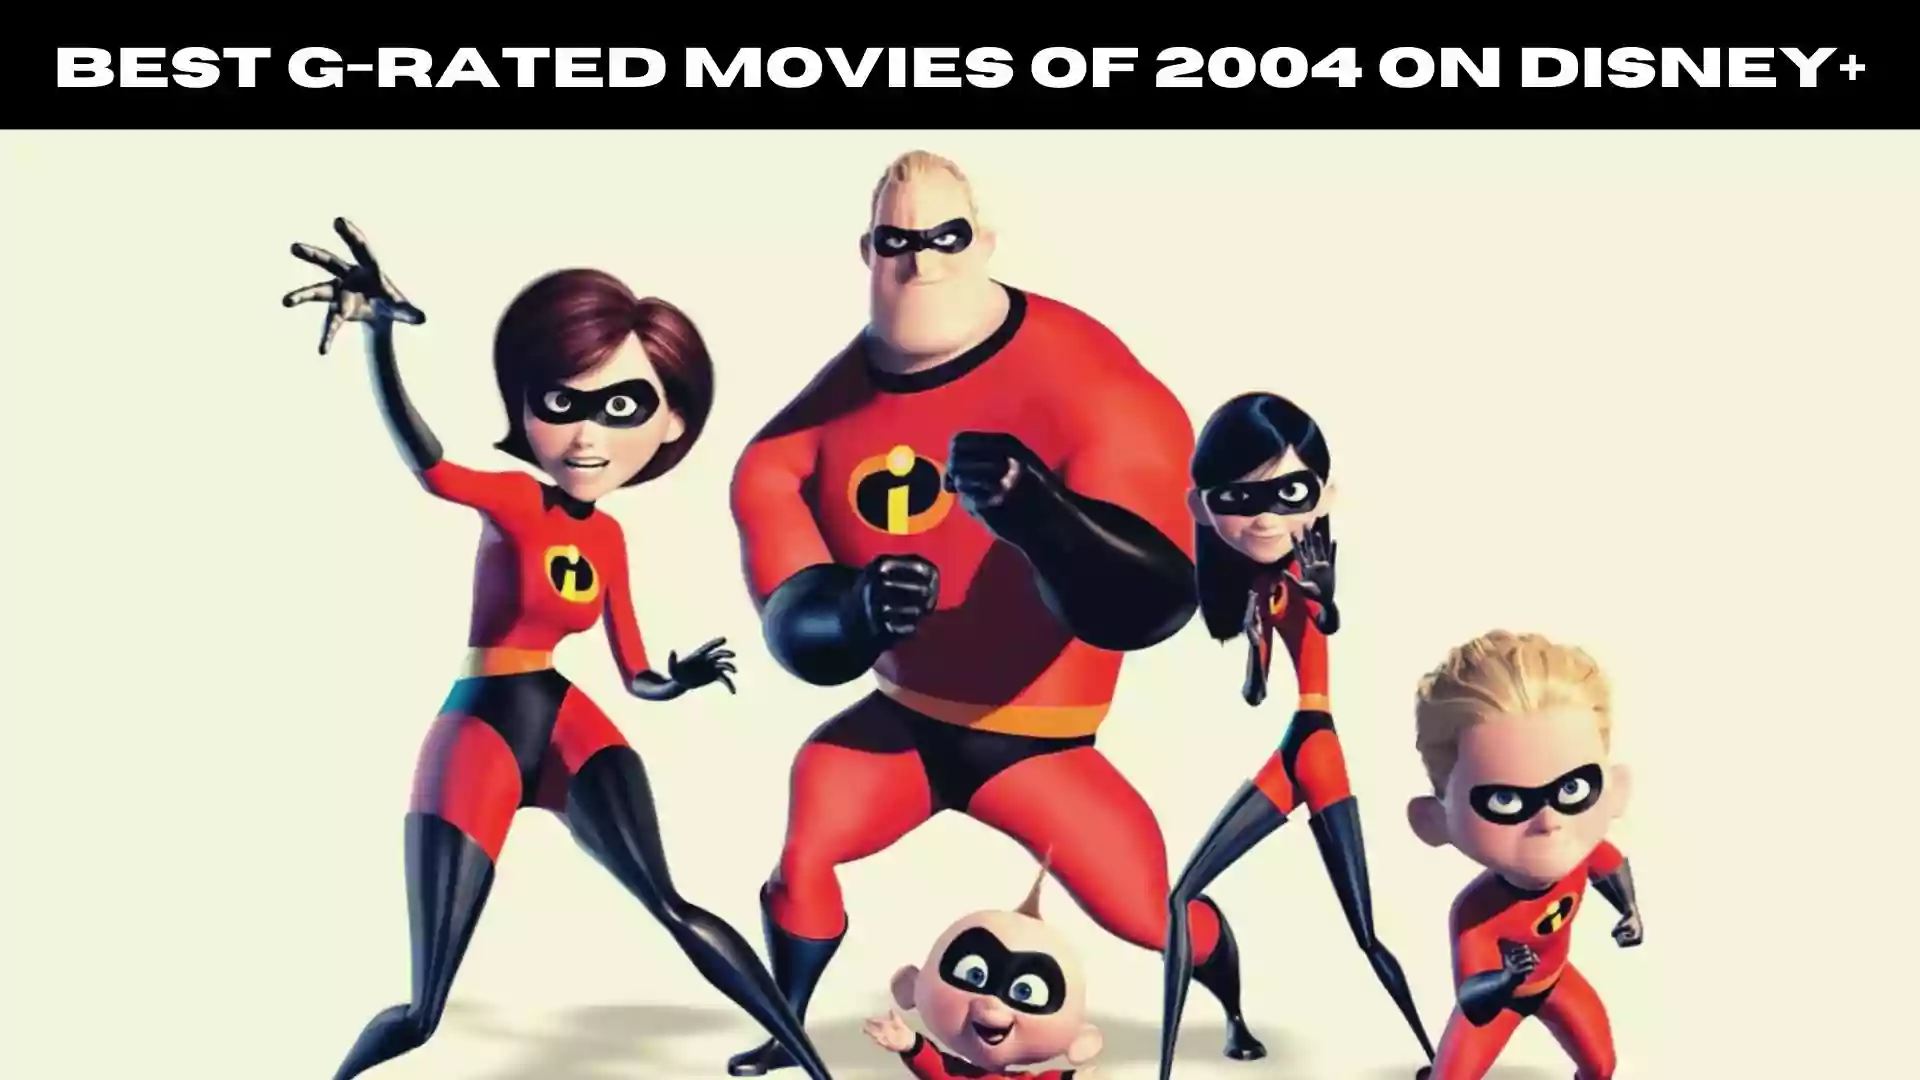 Best G-Rated Movies of 2004 on Disney+